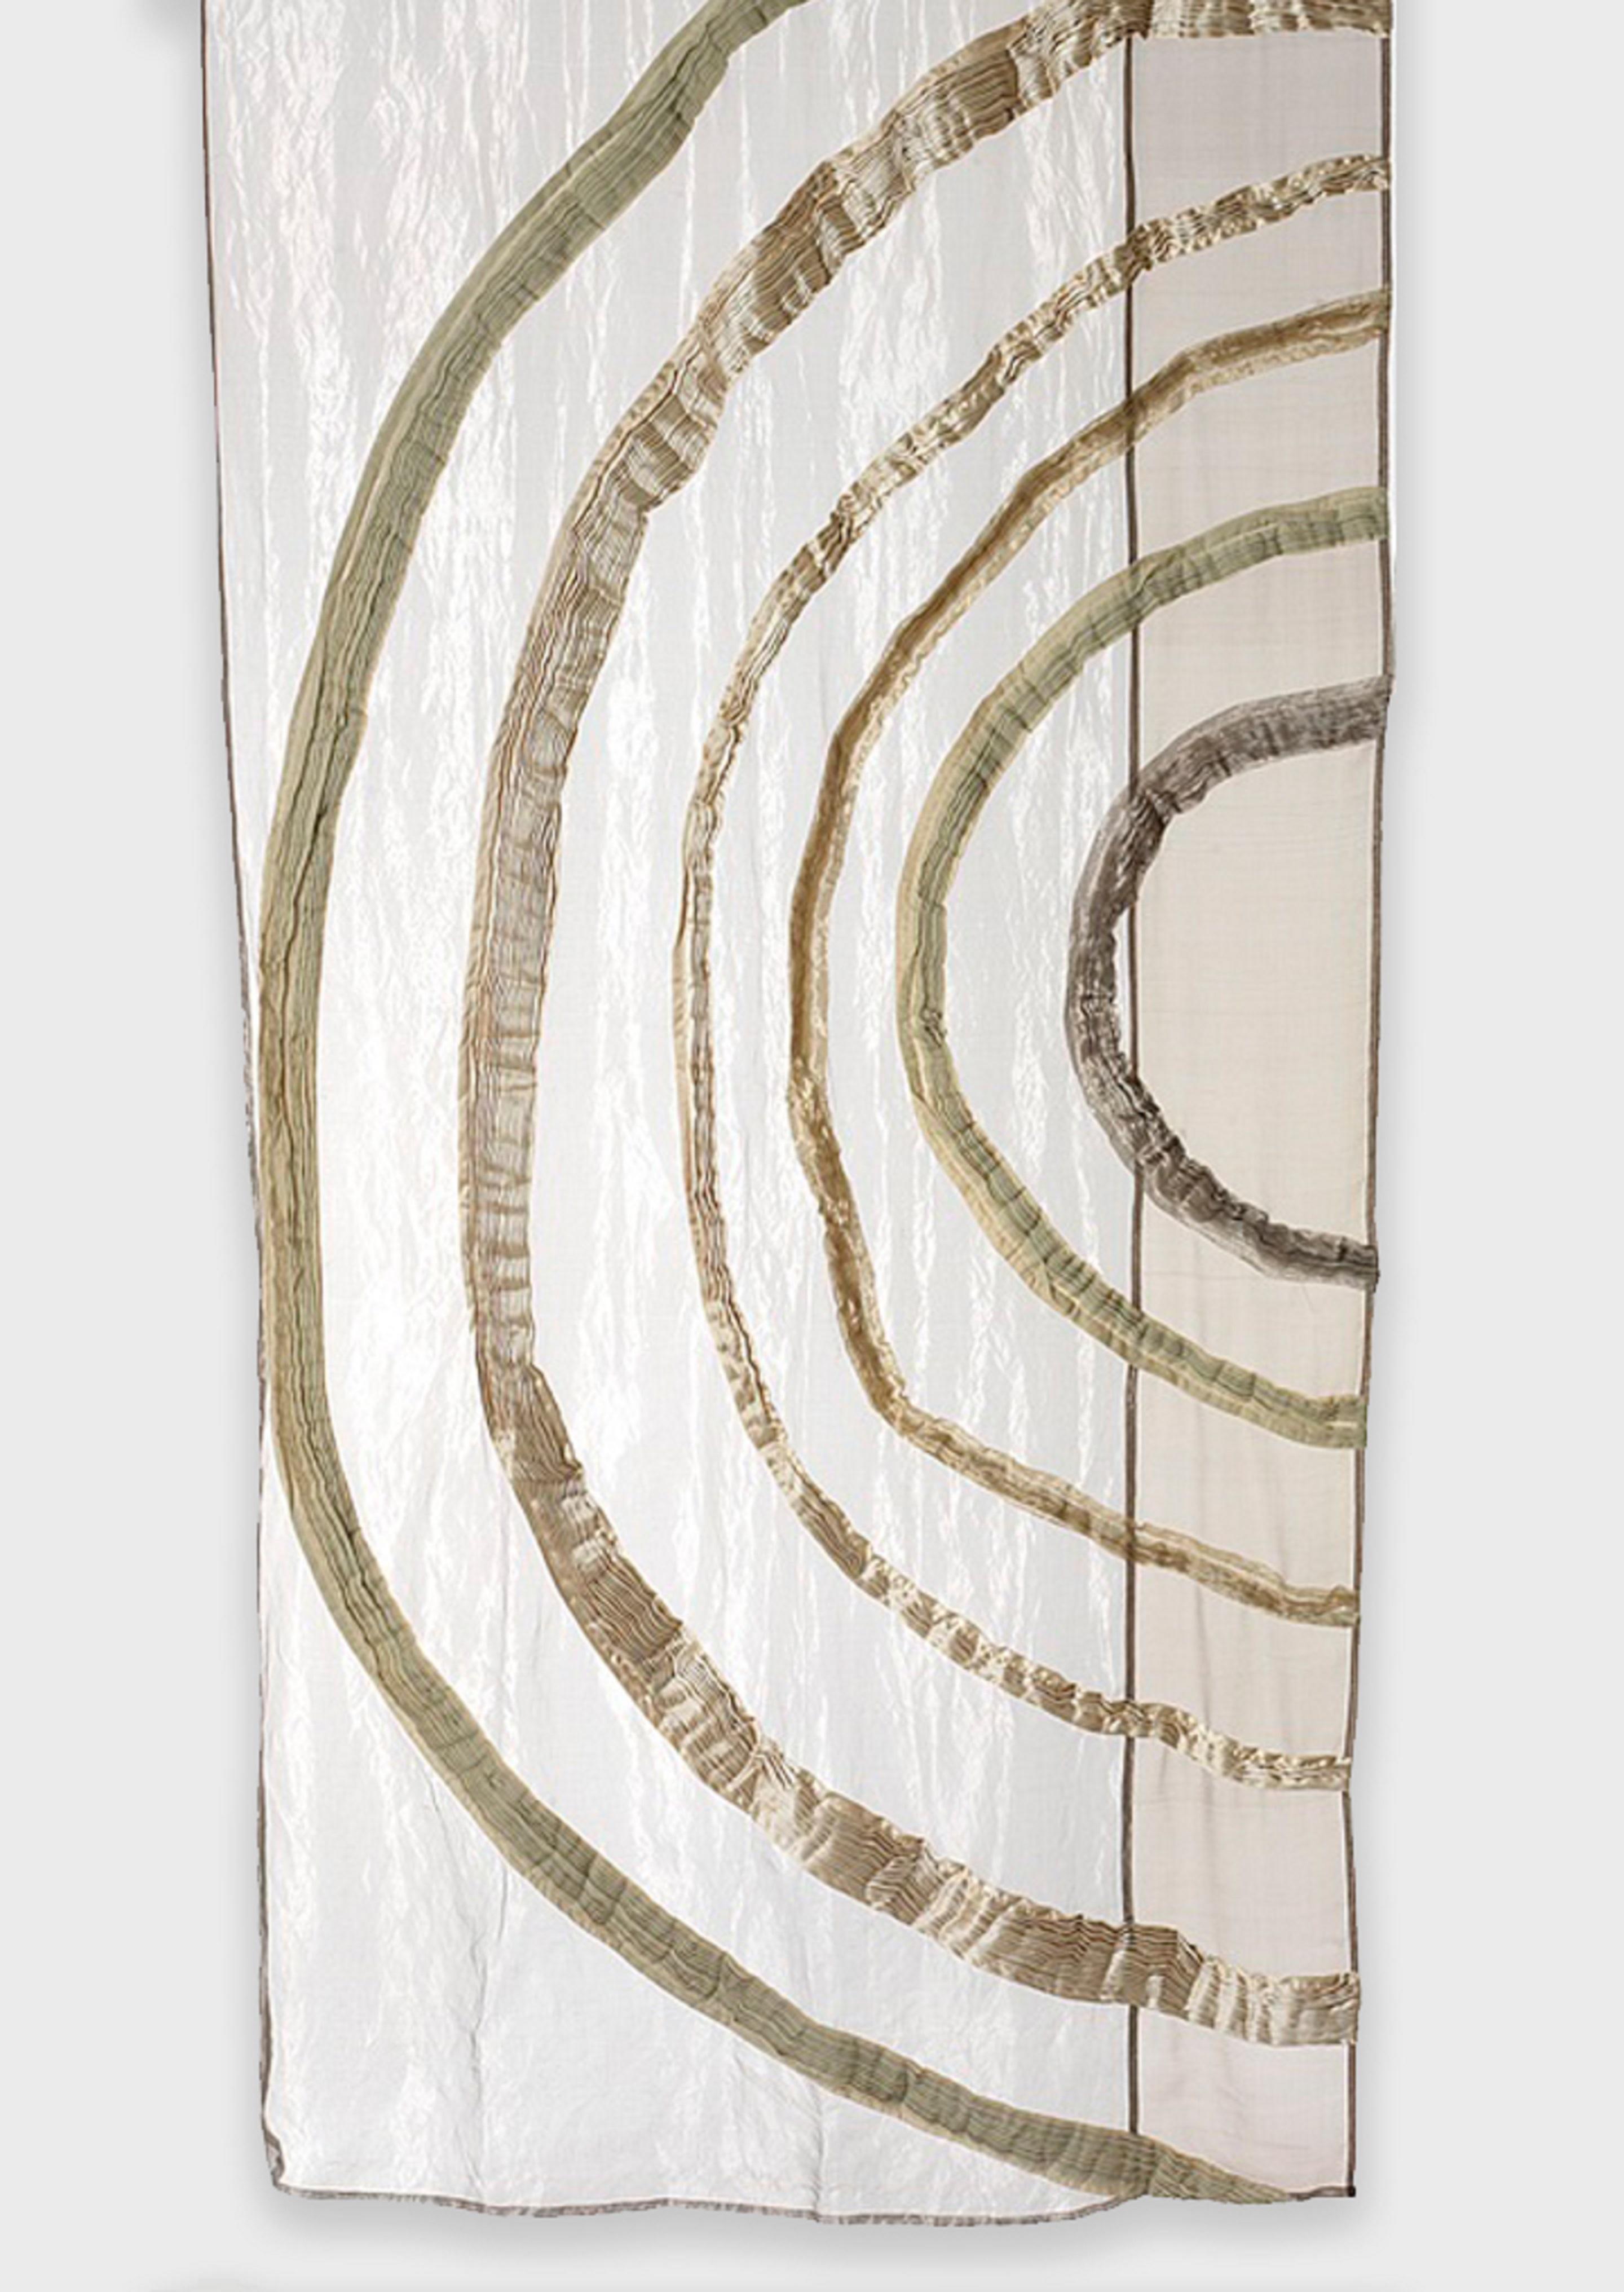 This panel is designed using the hand-pleated technique. Earthy and harmonious colors bring a serene presence to space. Pleats are arranged into symmetrical patterns.

This artwork is available in single panel or set of 2 - pricing on listing